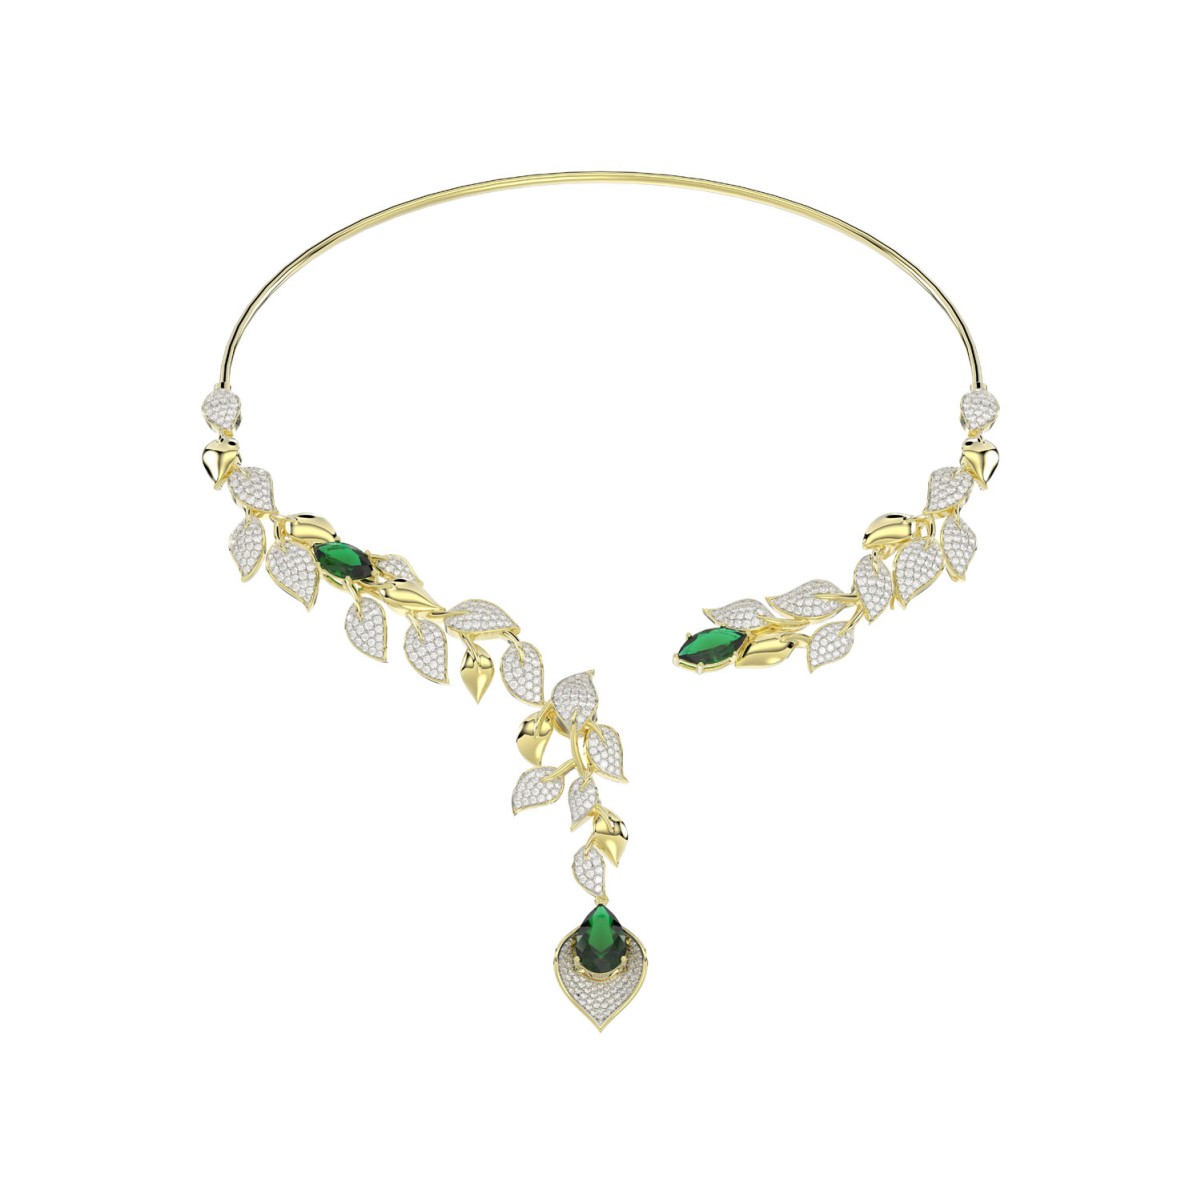 18K YELLOW GOLD 11 3/4CT ROUND/PEAR/MARQUISE DIAMOND LADIES NECKLACE(COLOR STONE GREEN EMERALD PEAR DIAMOND 4 1/6CT/MARQUISE DIAMOND 3 5/8CT)